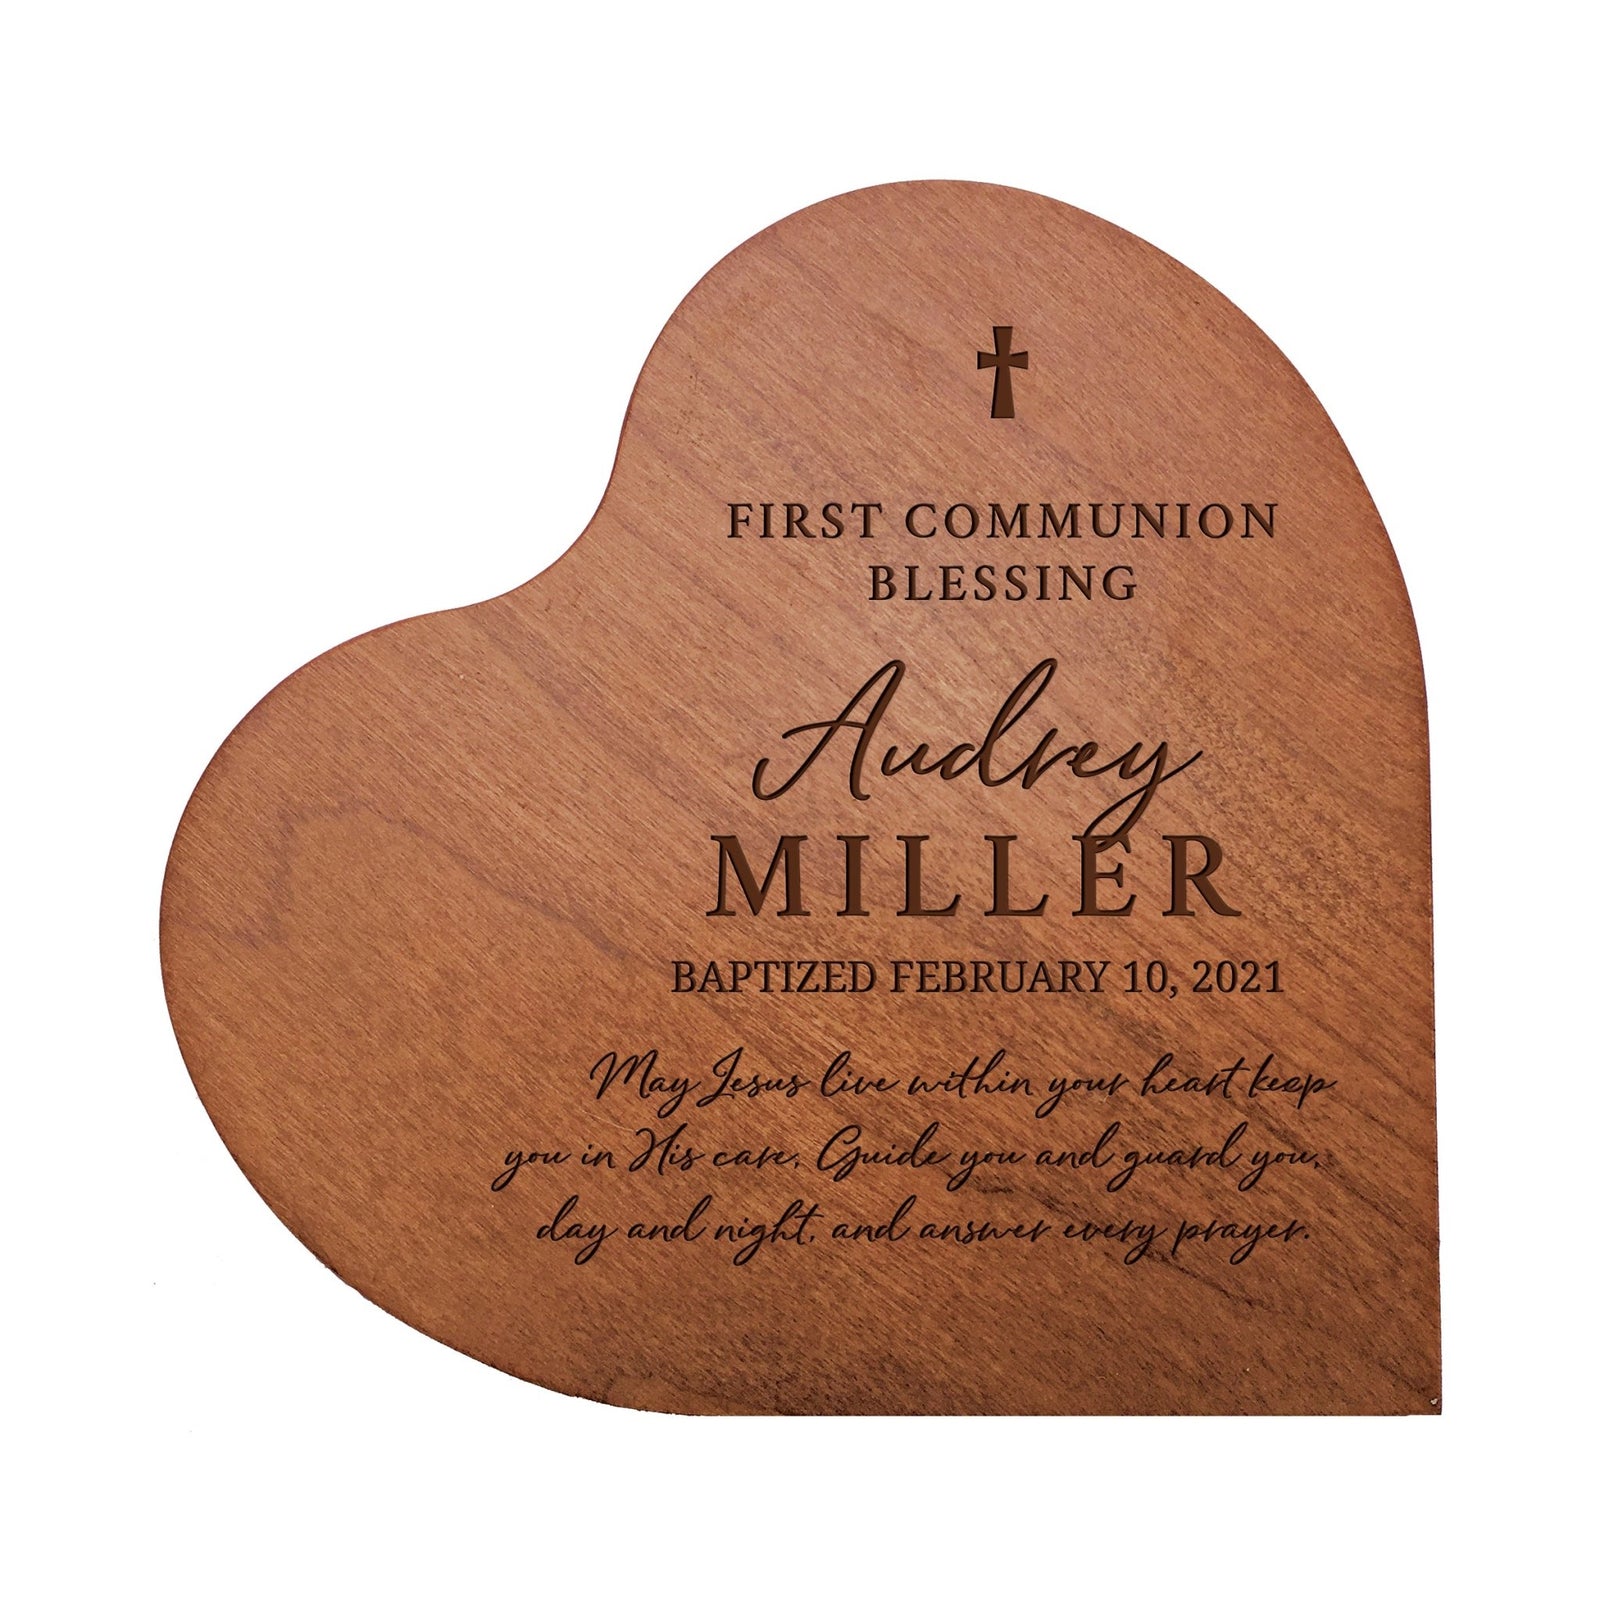 Personalized Solid Wood Heart Decoration With Inspirational Verse Keepsake Gift 5x5.25 - First Communion Blessing - LifeSong Milestones